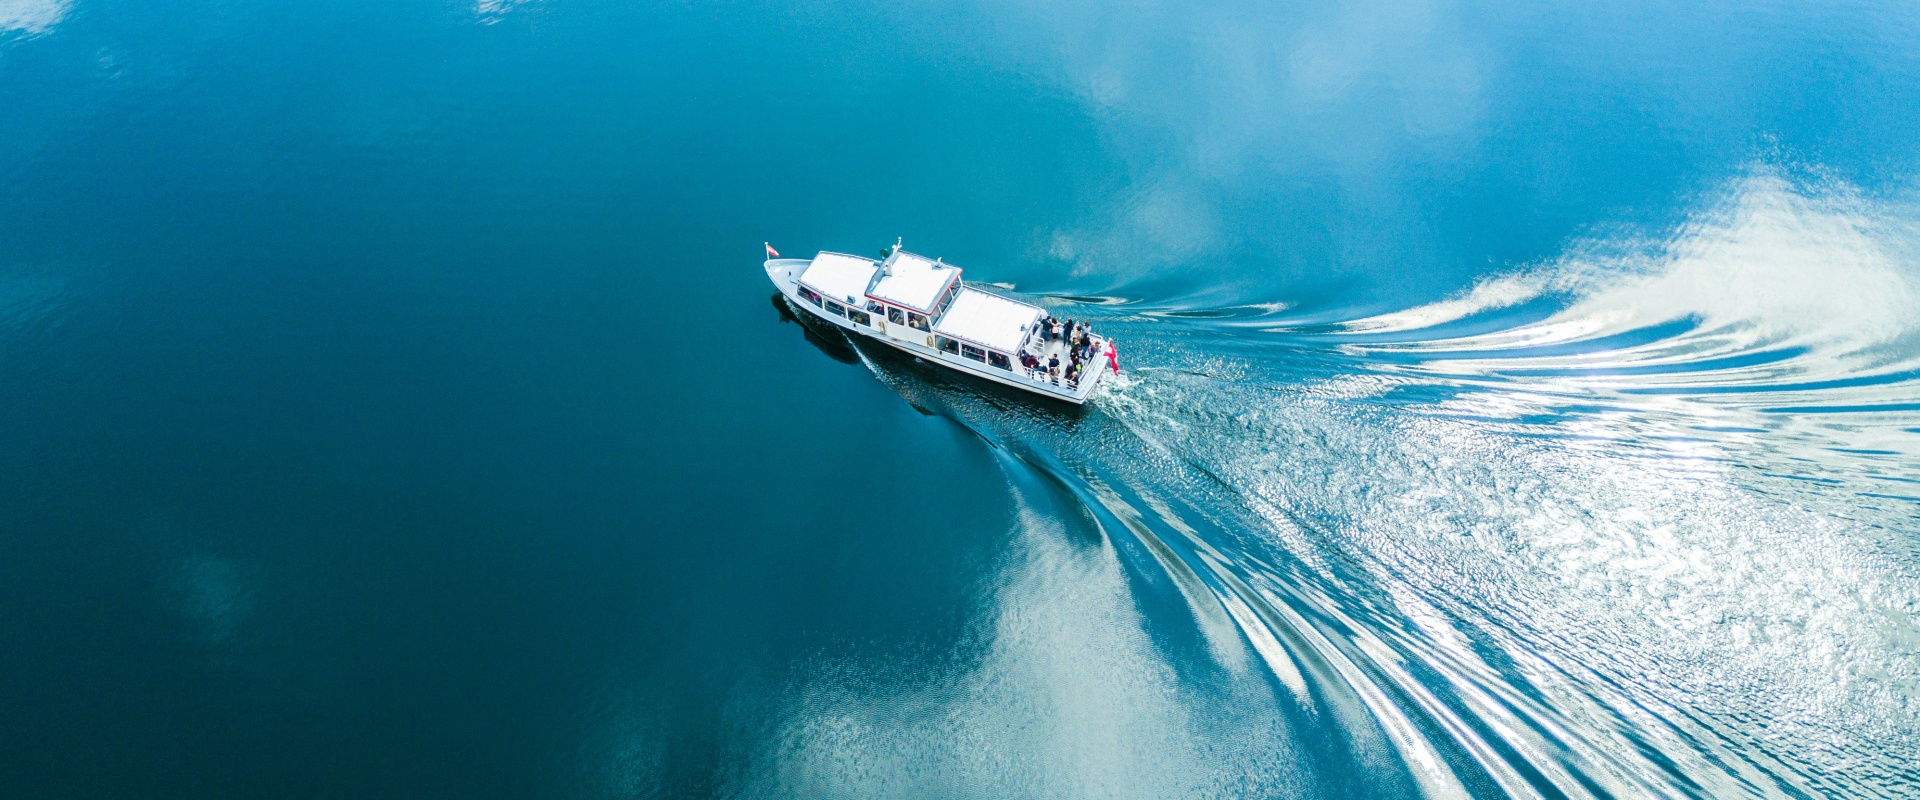 The Pros and Cons of Buying a New Boat